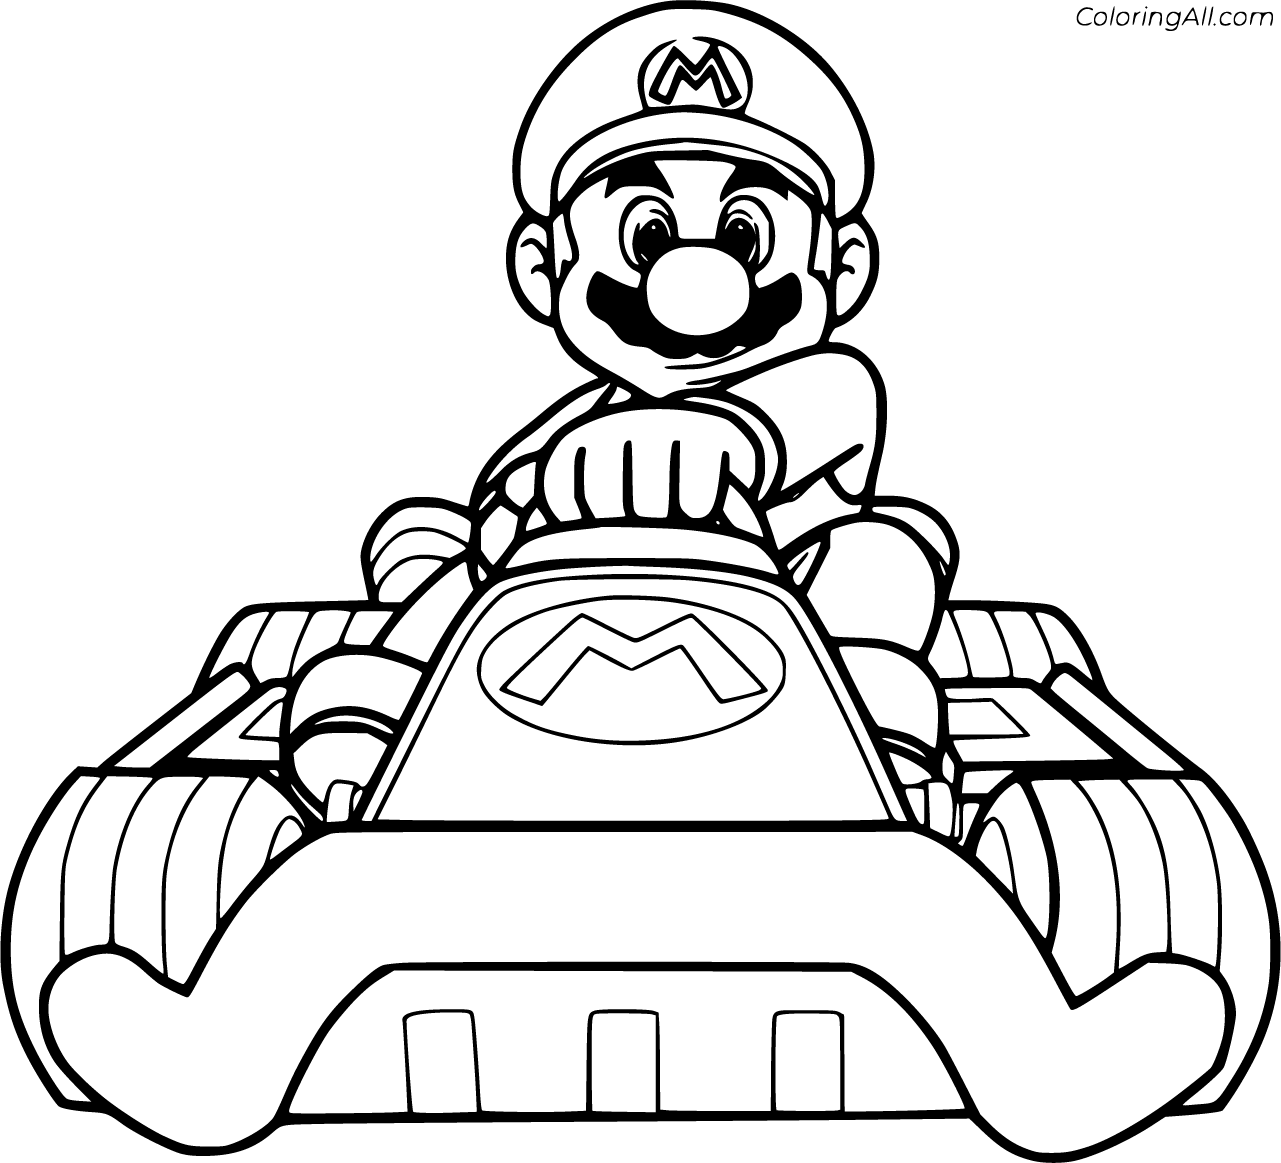 Mario Kart Coloring Pages - ColoringAll